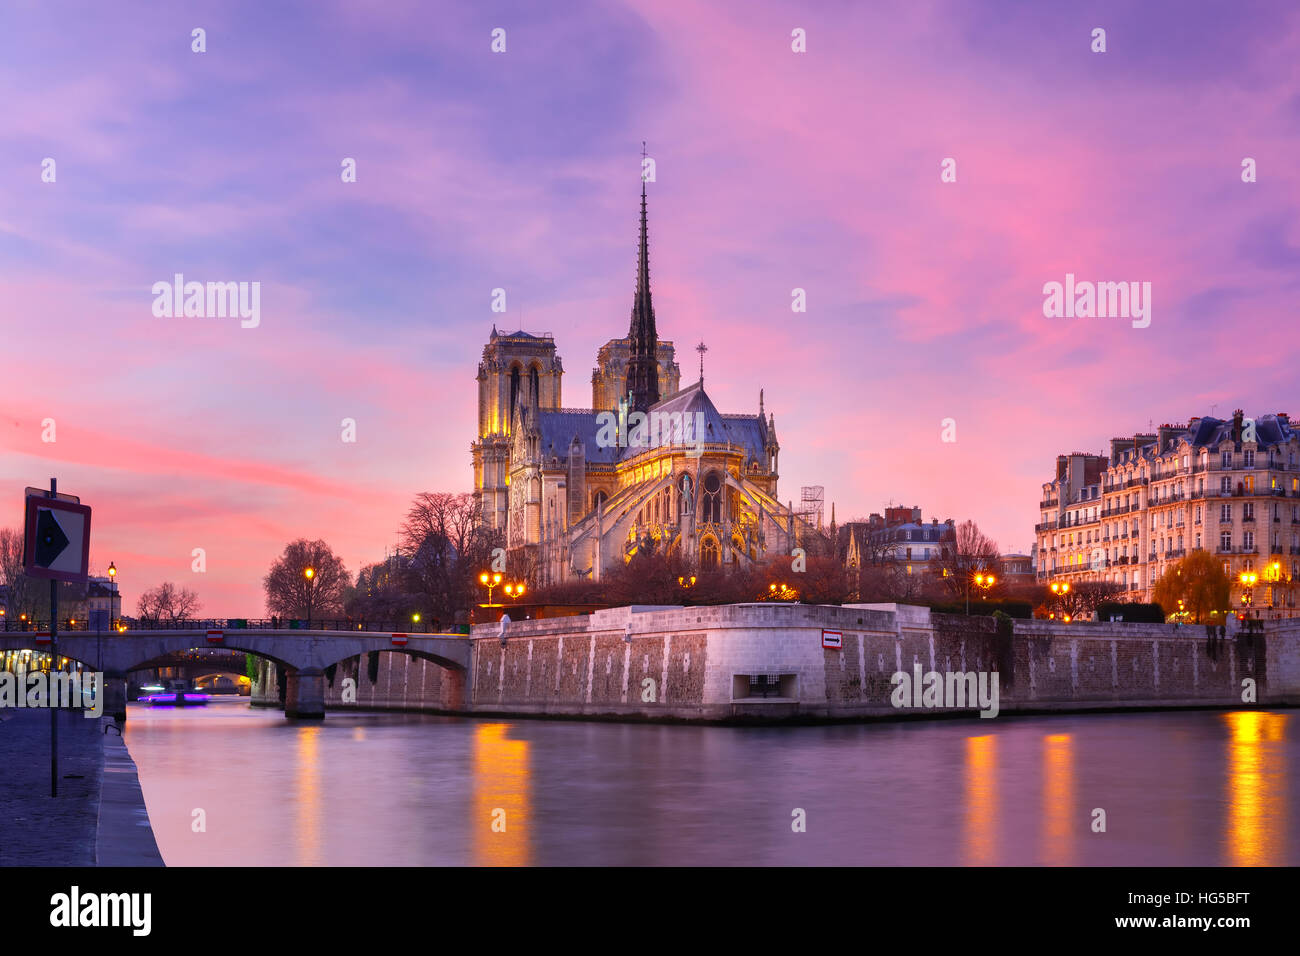 Cathedral of Notre Dame de Paris at sunset, France Stock Photo